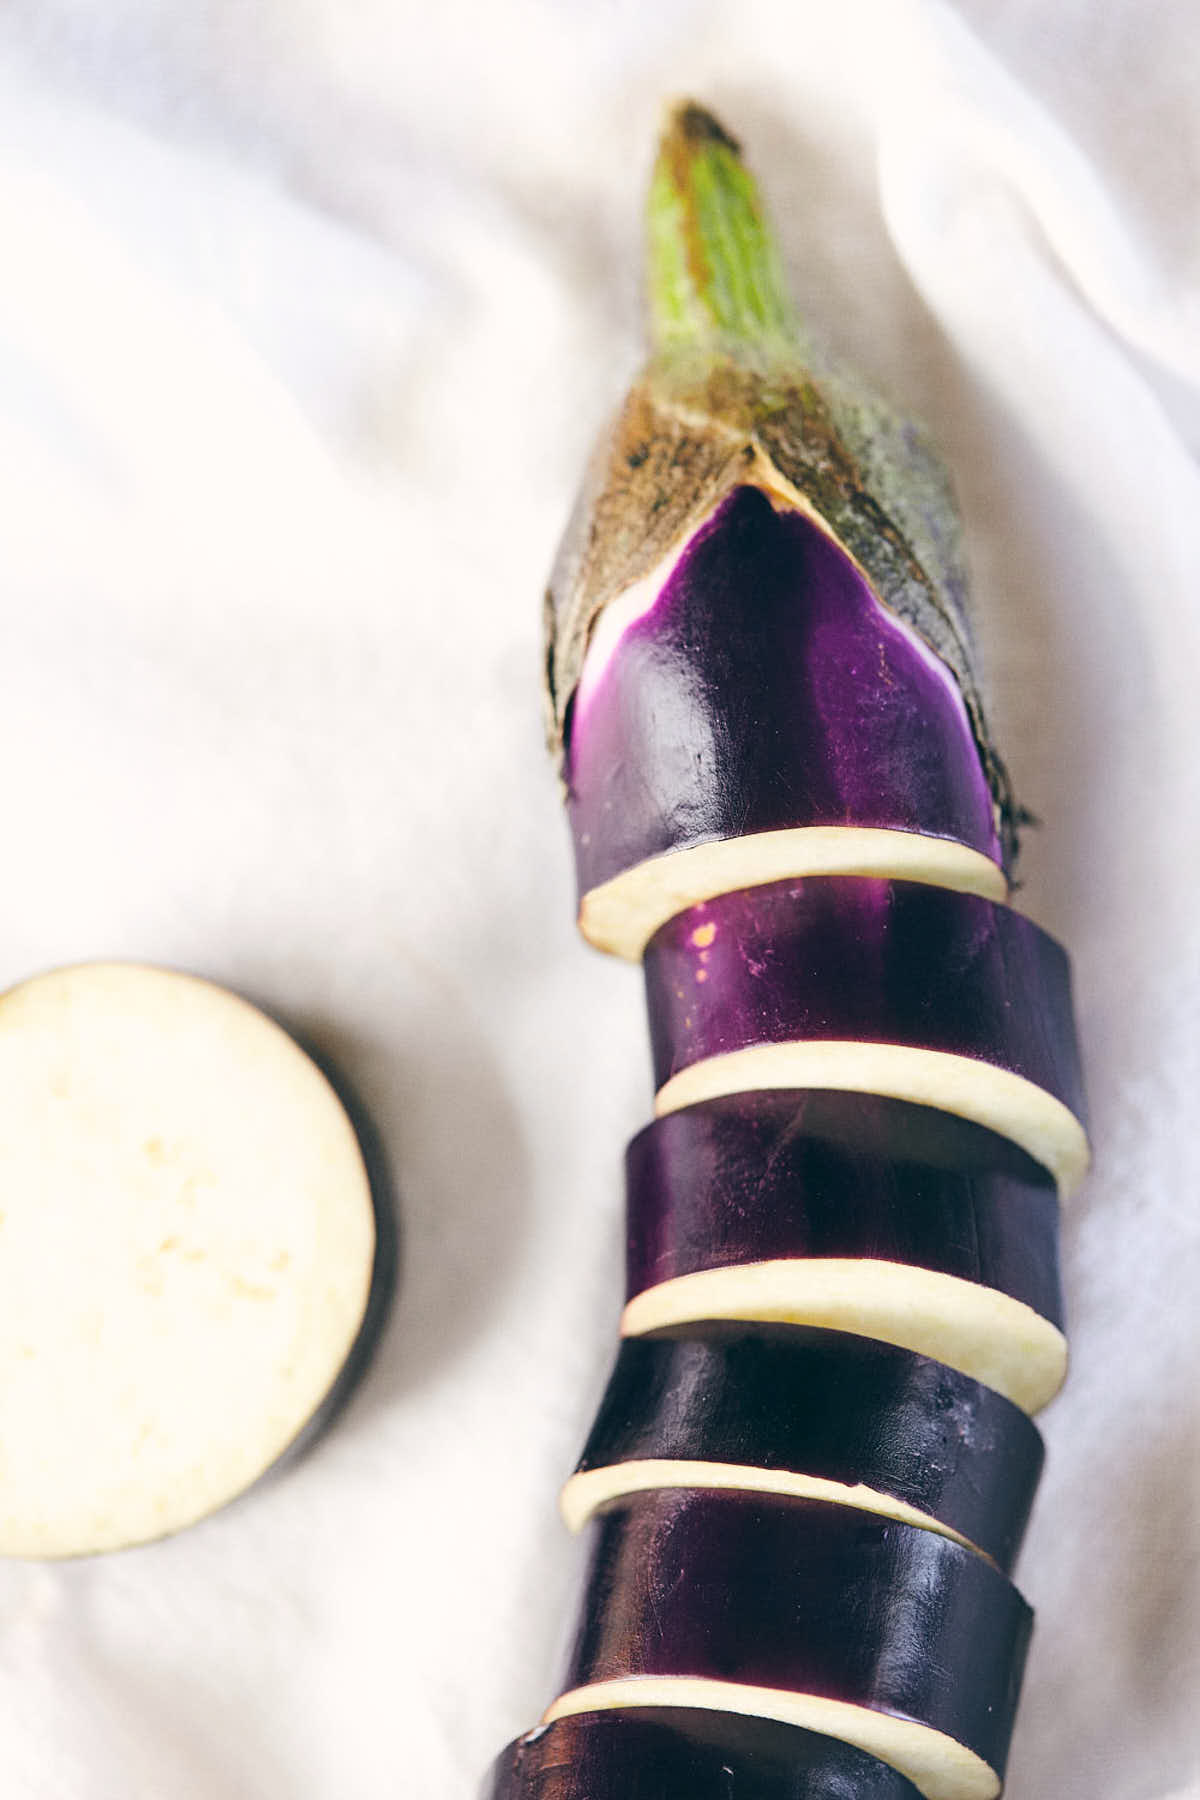 Japanese eggplant cut into segments for skewering